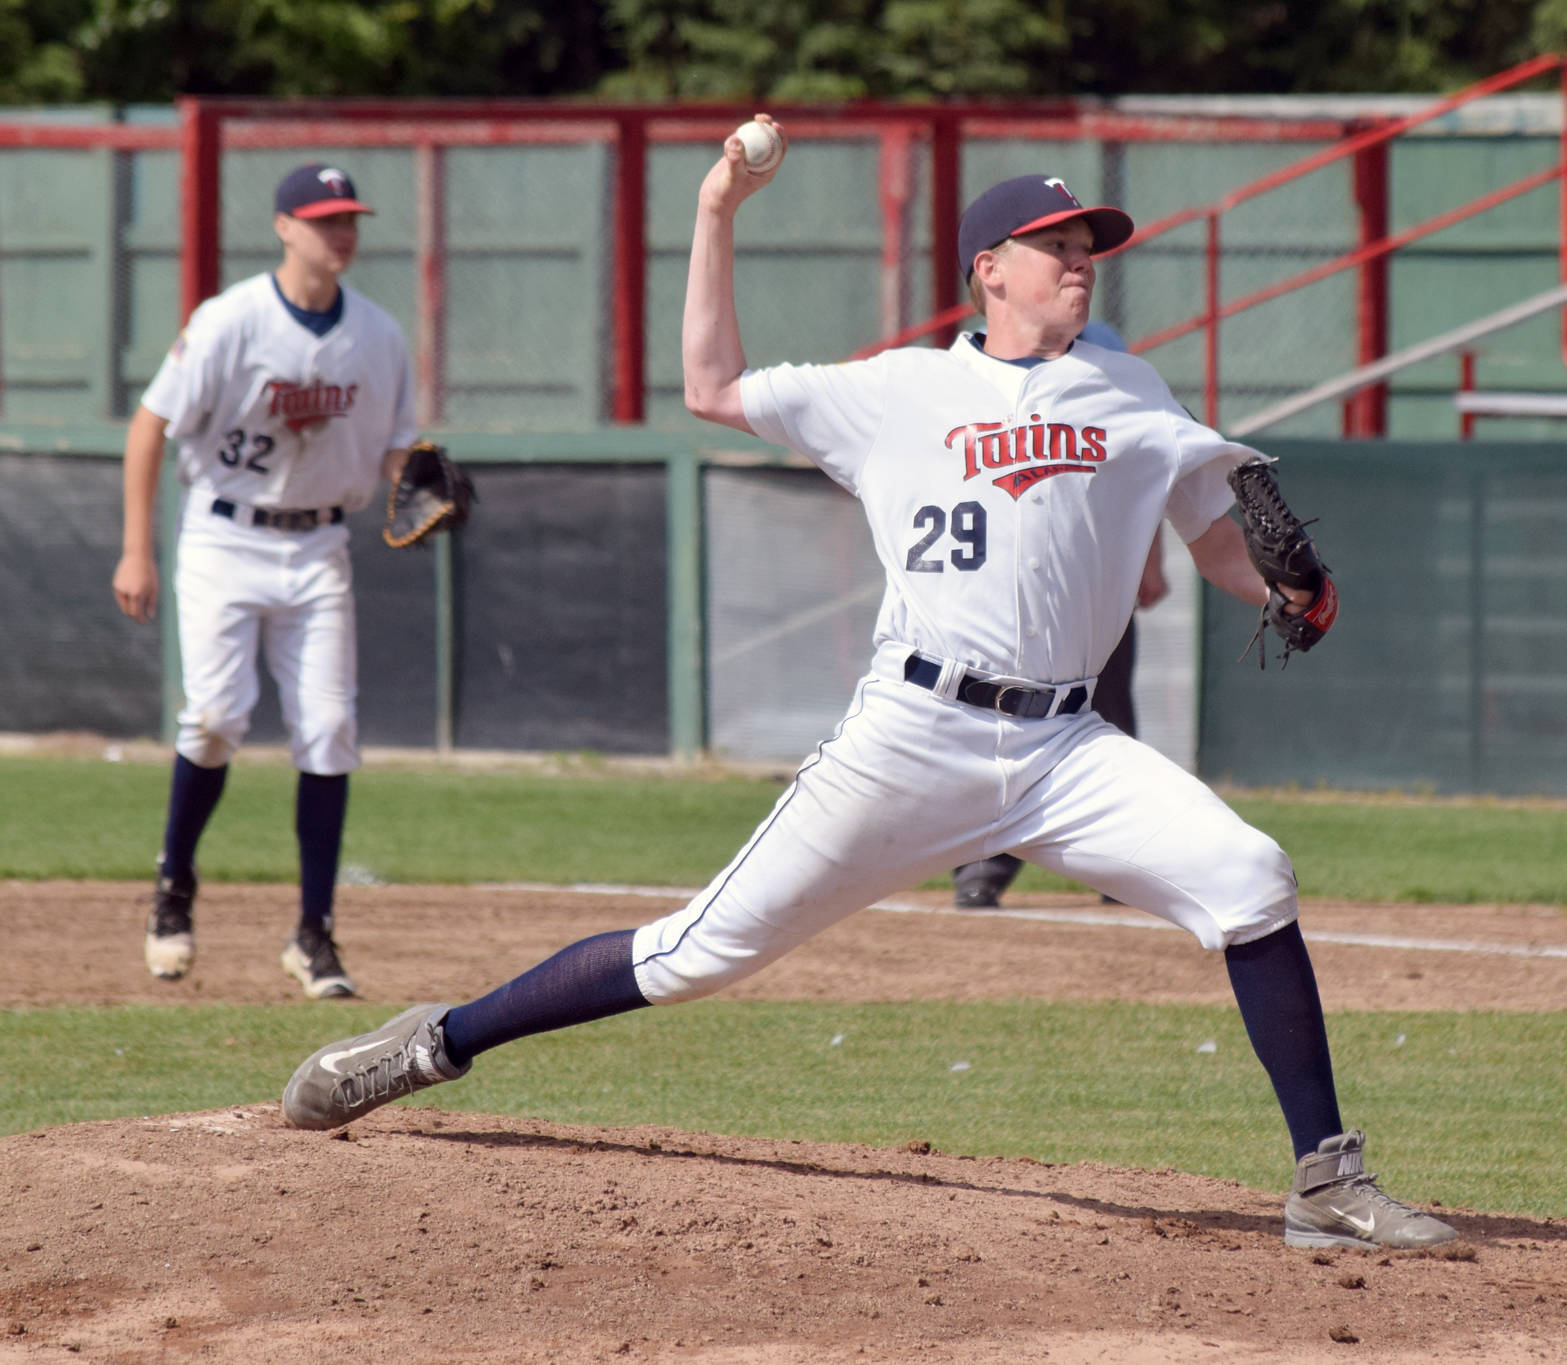 Twins reliever Austin Asp delivers to Palmer on Sunday, July 15, 2018, at Coral Seymour Memorial Park in Kenai. (Photo by Jeff Helminiak/Peninsula Clarion)